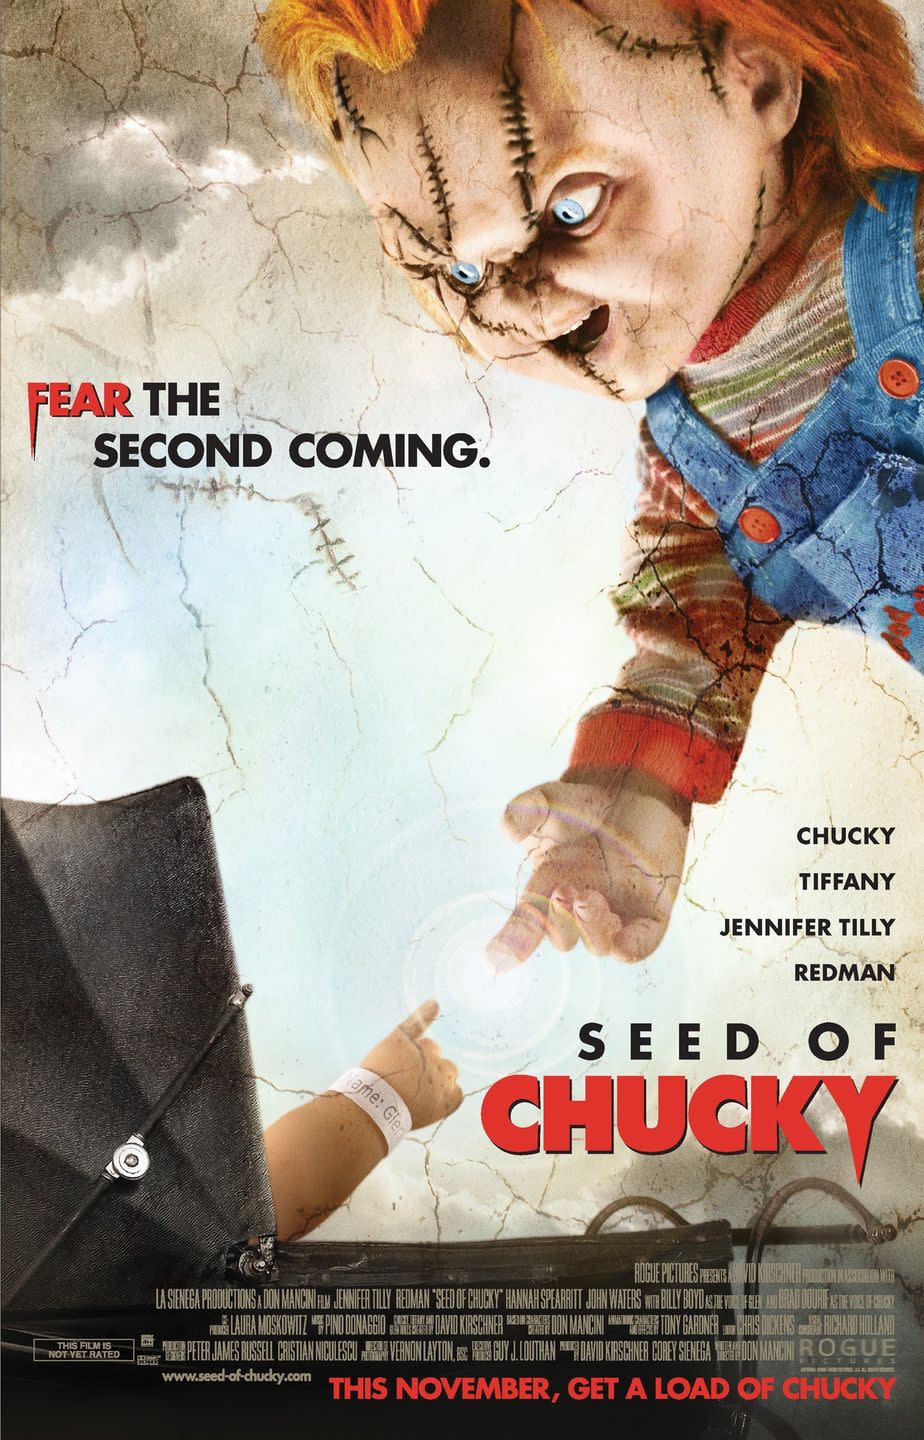 5) Seed of Chucky (2004)